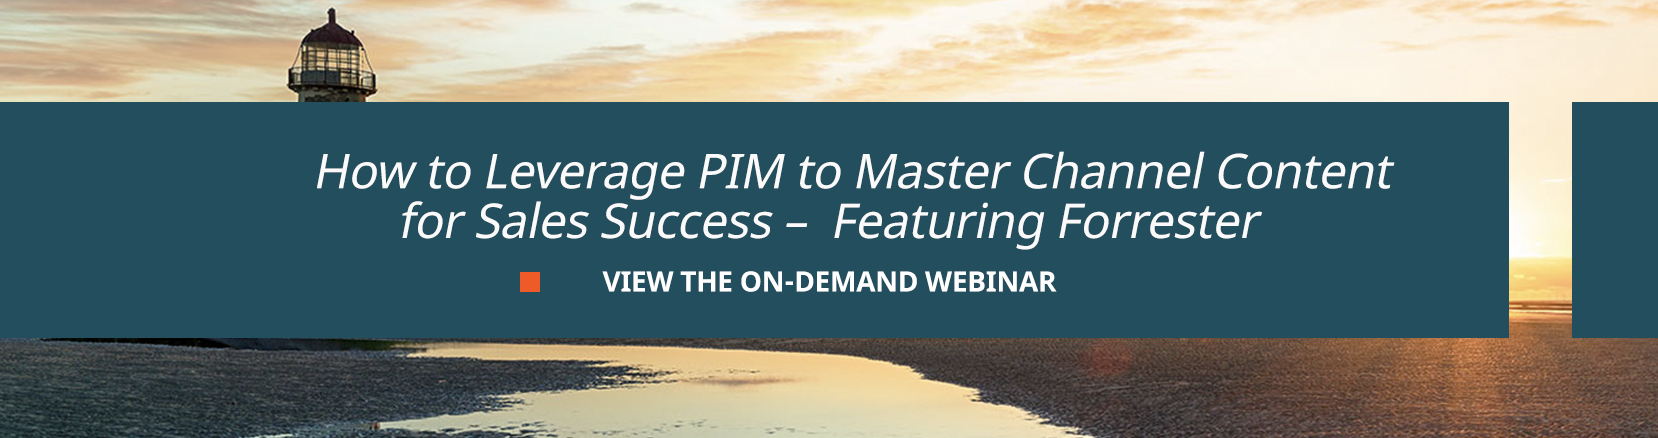 how to leverage pim to master channel content for sales success